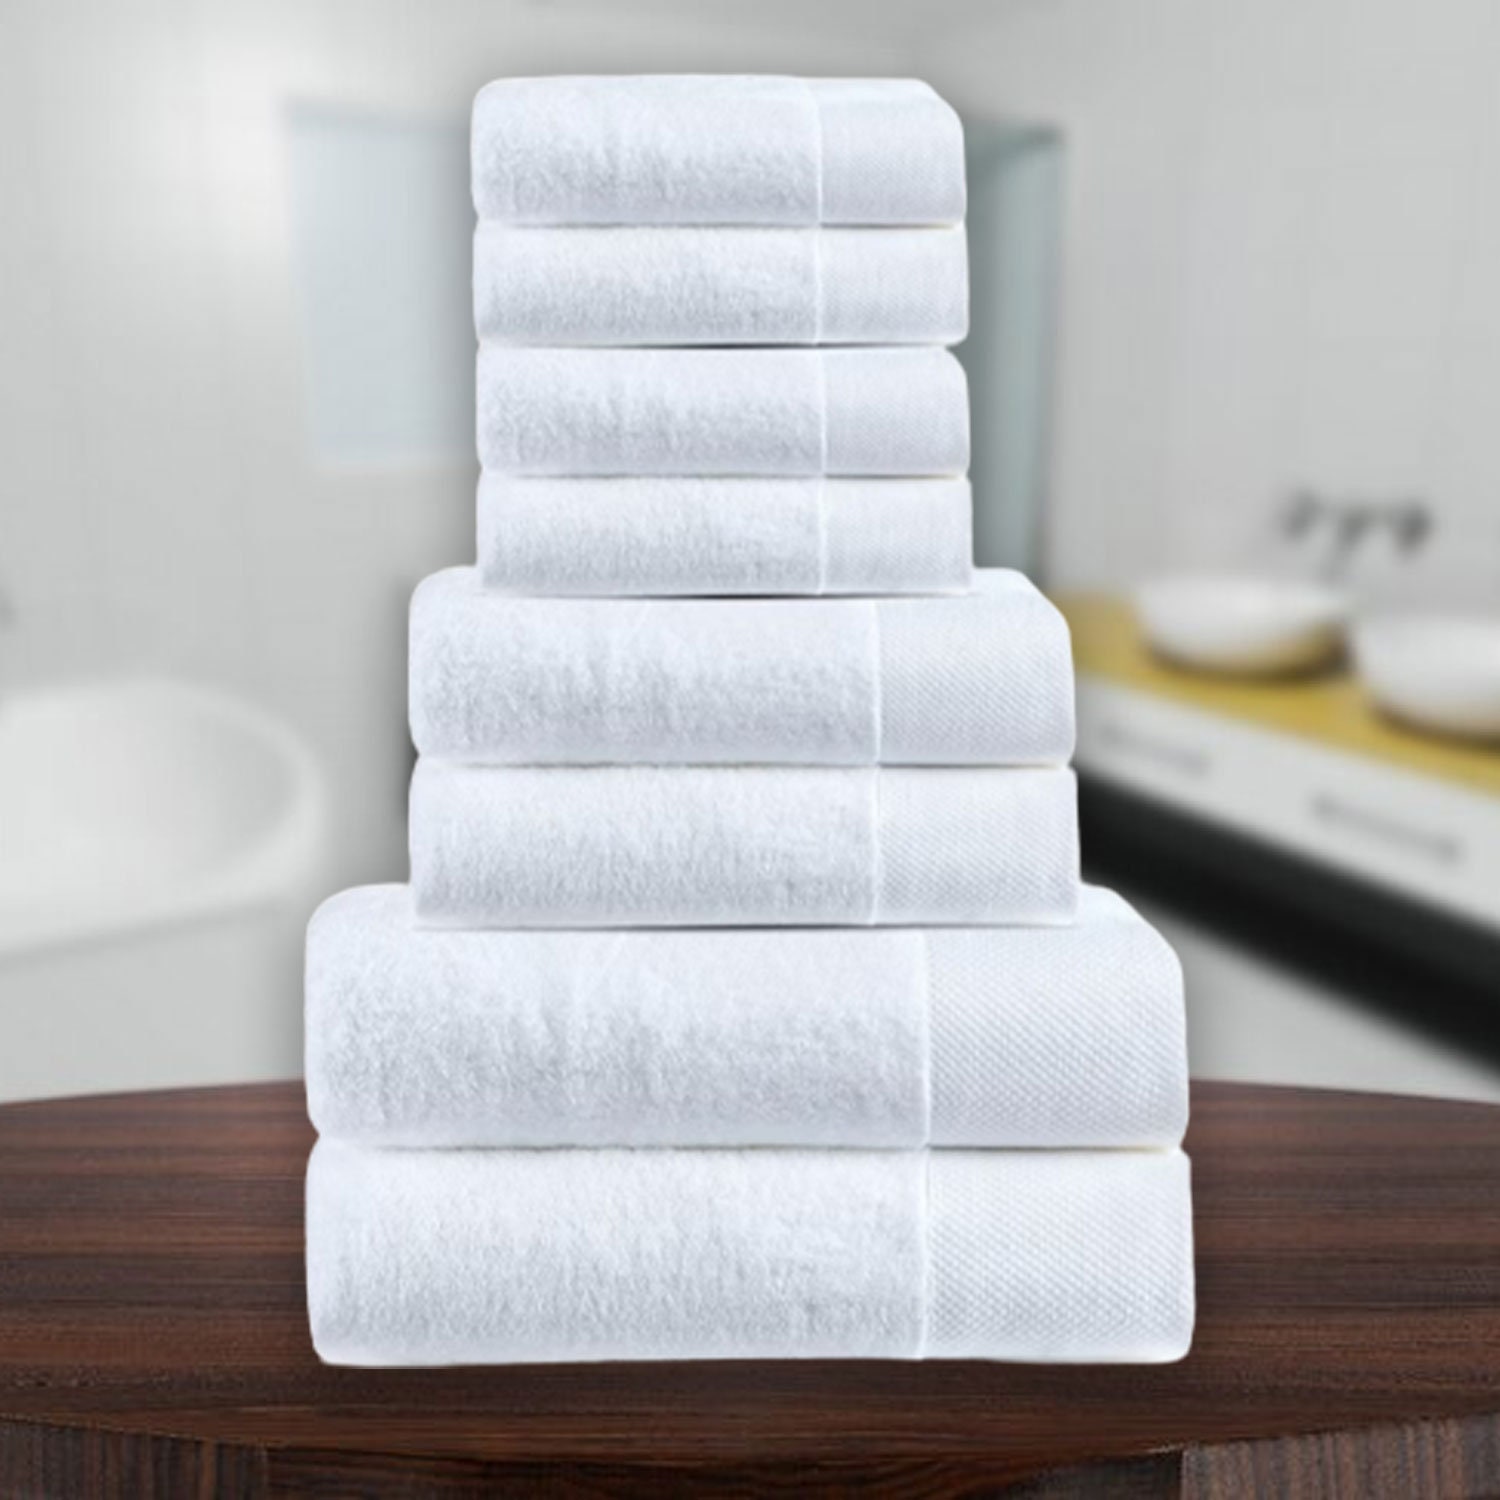 Up to 75% Off Tommy Hilfiger Bath Towels, Hand Towels & Washcloths